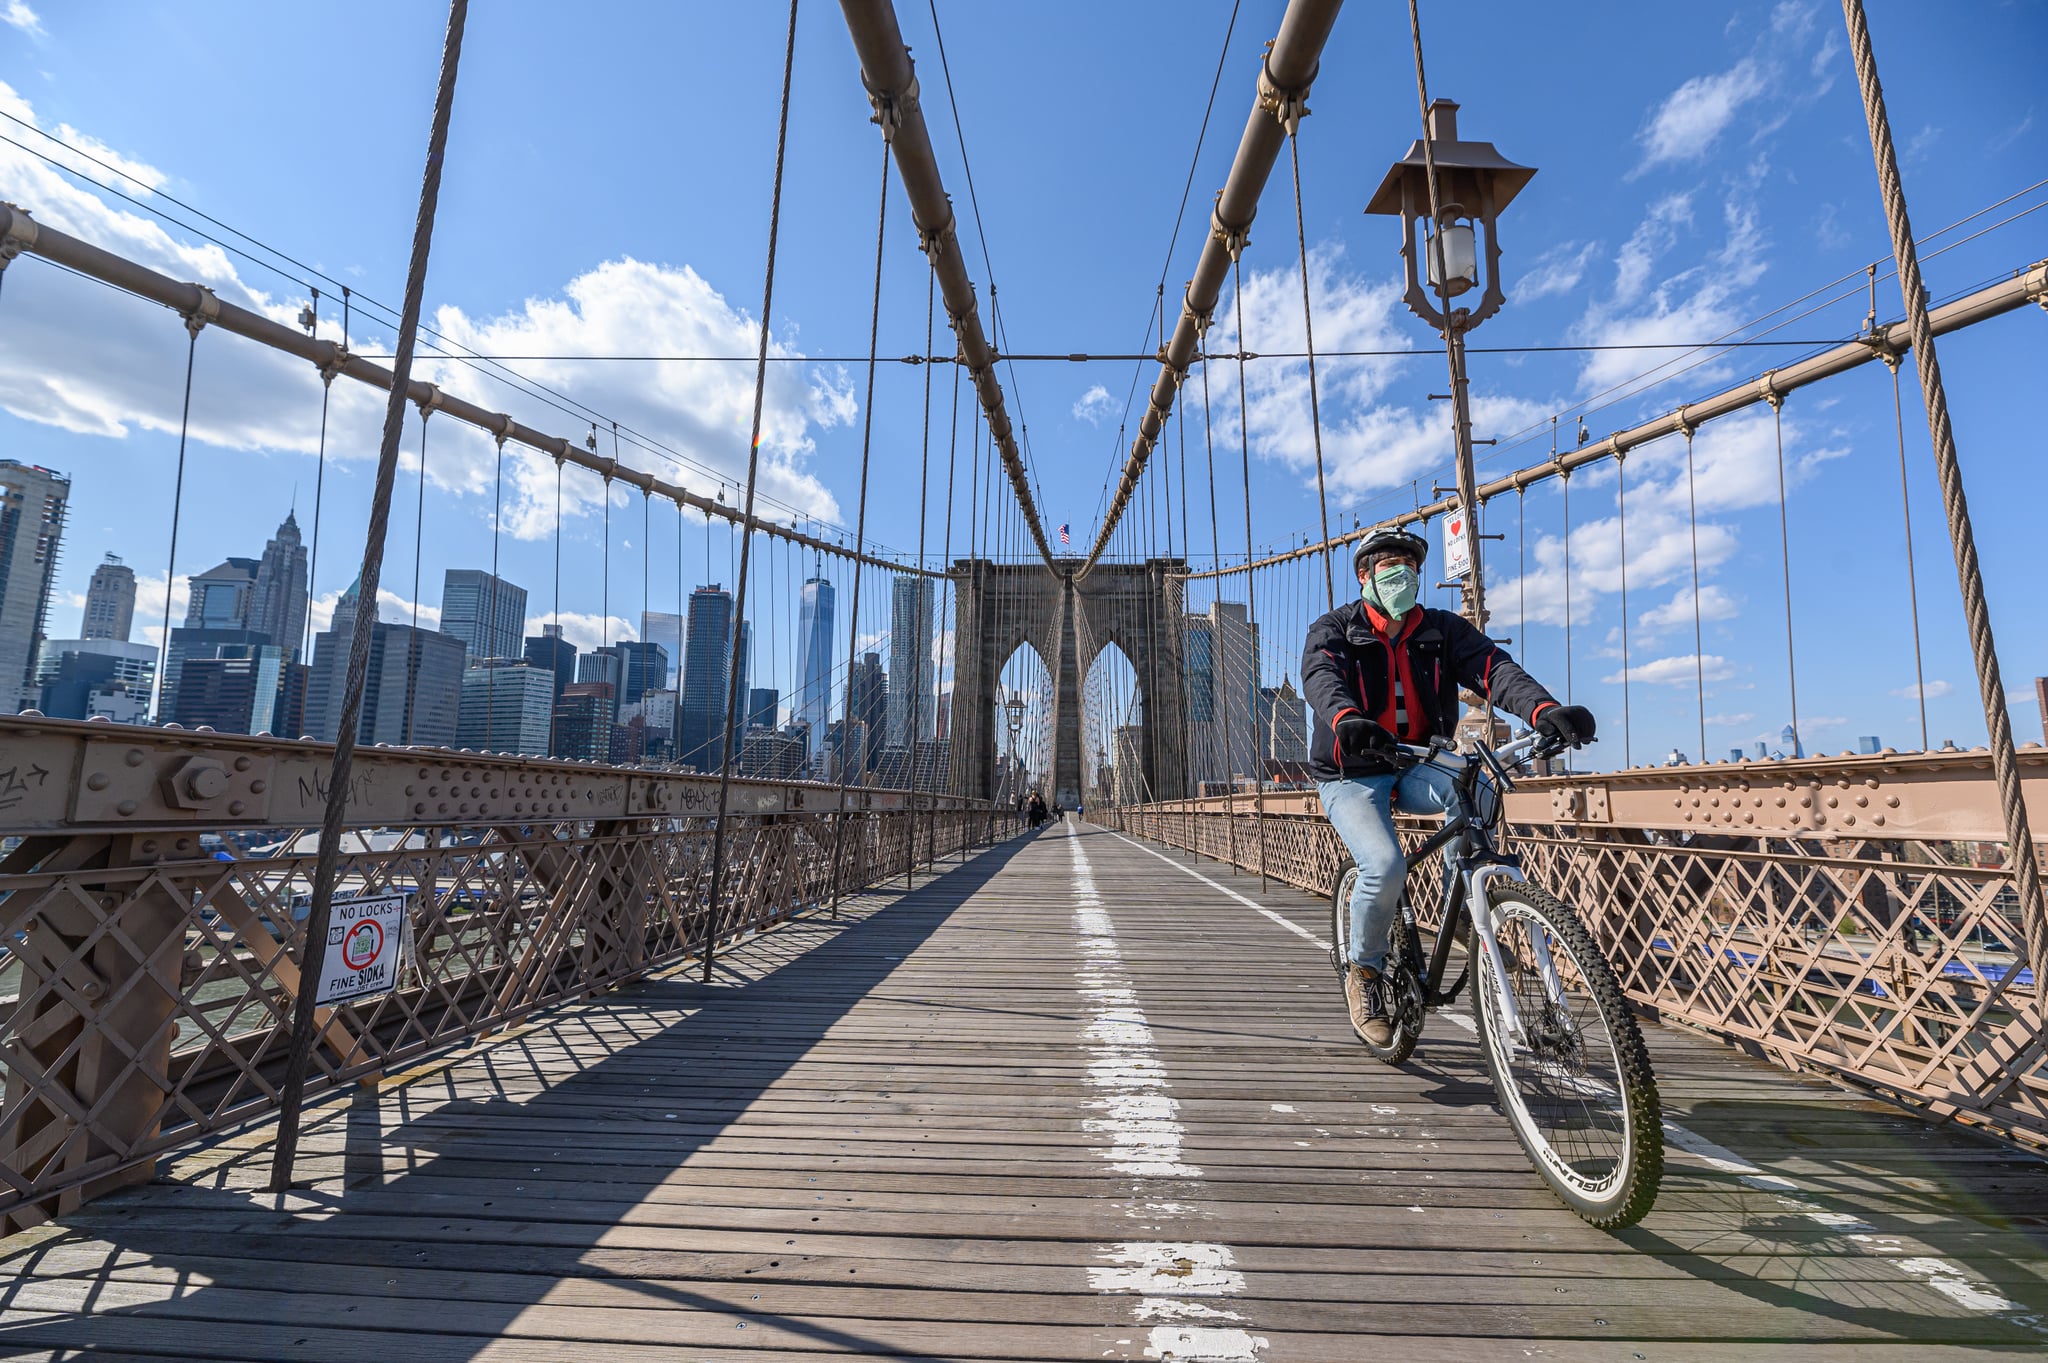 NEW YORK, NY - APRIL 15: A man wearing a protective mask rides a bicycle on the Brooklyn Bridge during the coronavirus pandemic on April 15, 2020 in New York City. COVID-19 has spread to most countries around the world, claiming over 134,000 lives lost with over 2 million infections reported. (Photo by Noam Galai/Getty Images)